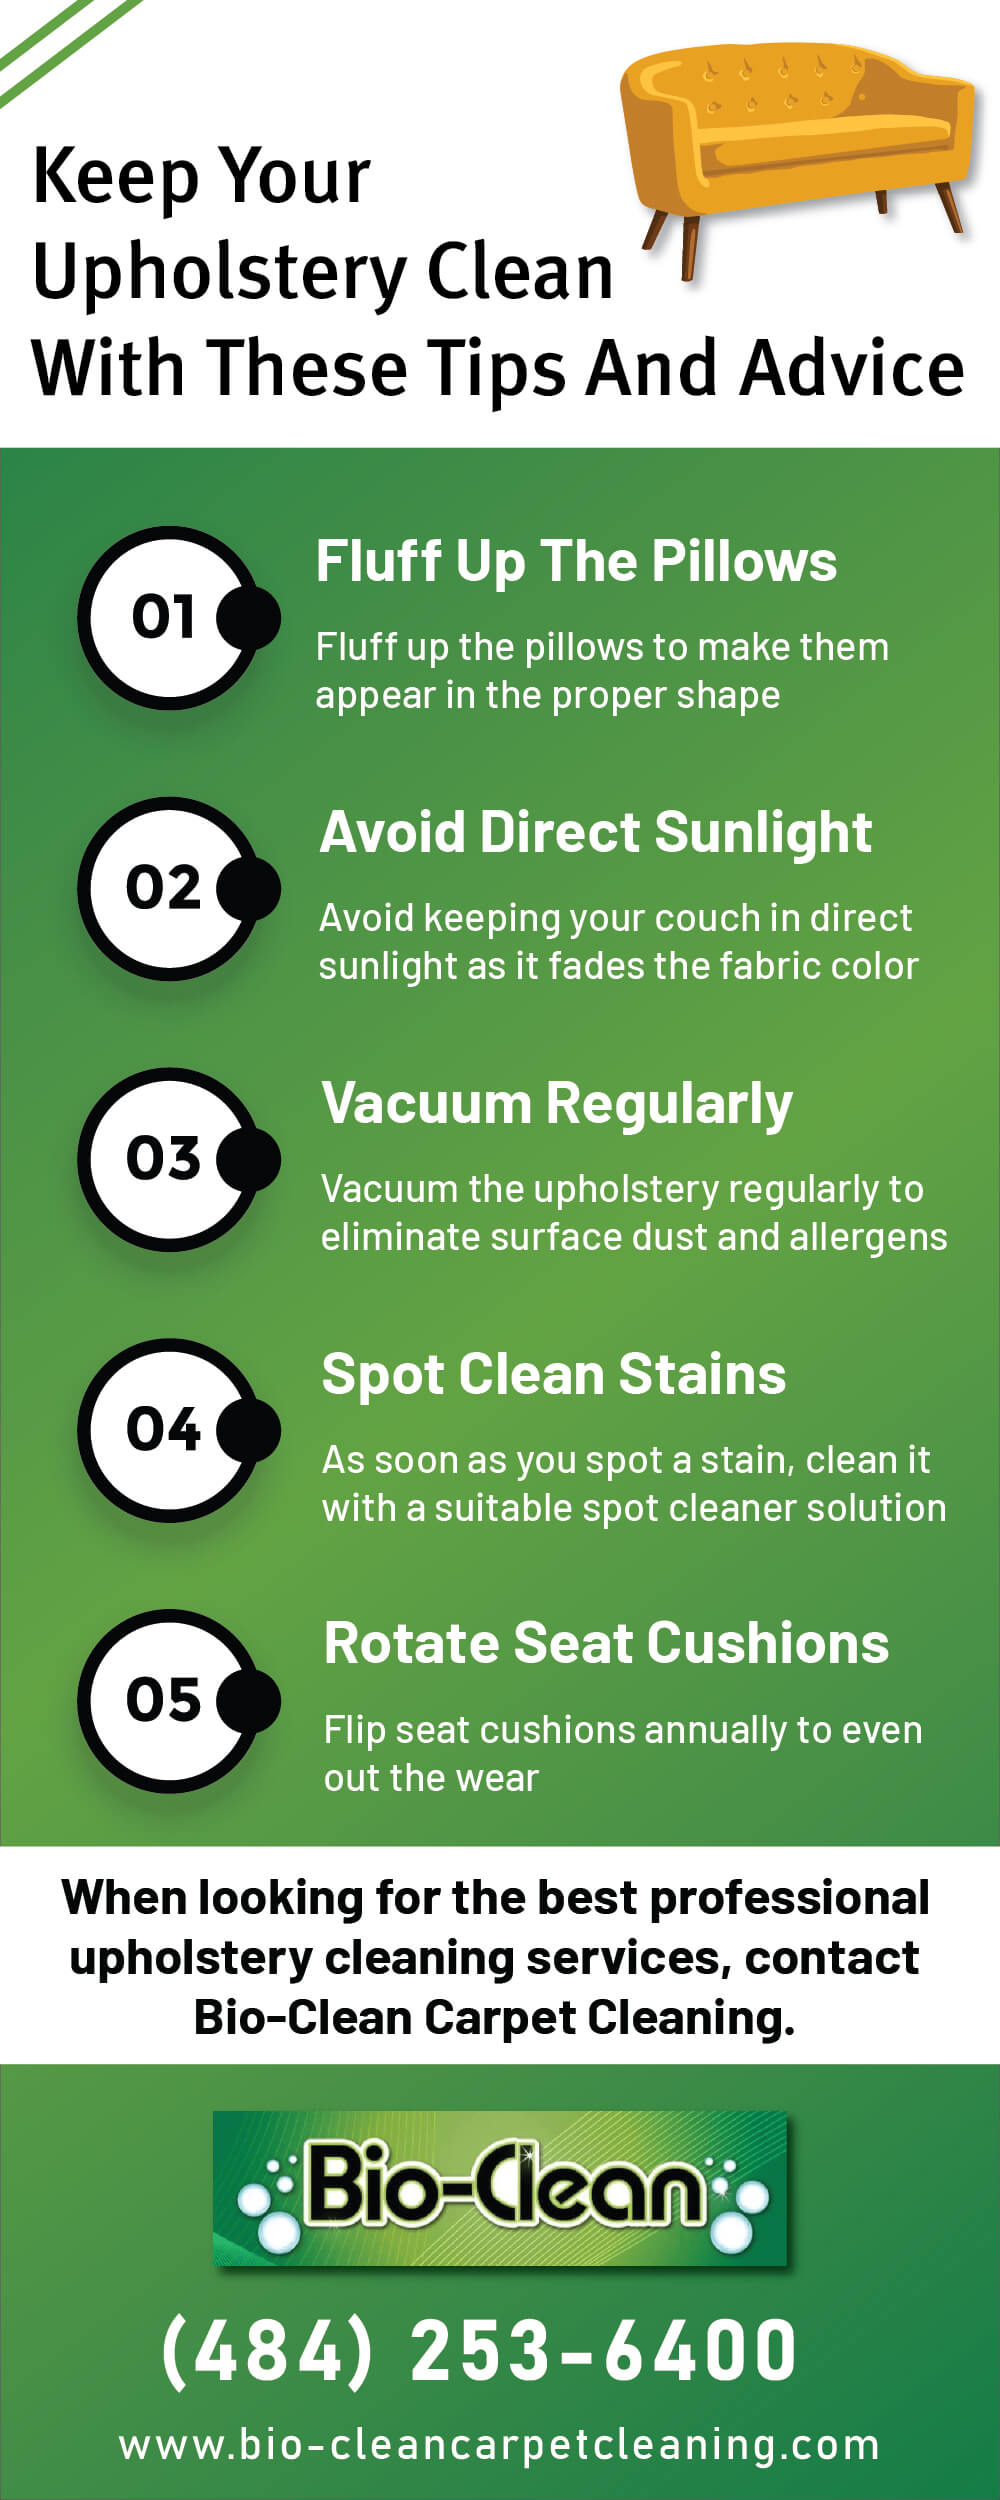 Keep Your Upholstery Clean With These Tips And Advice